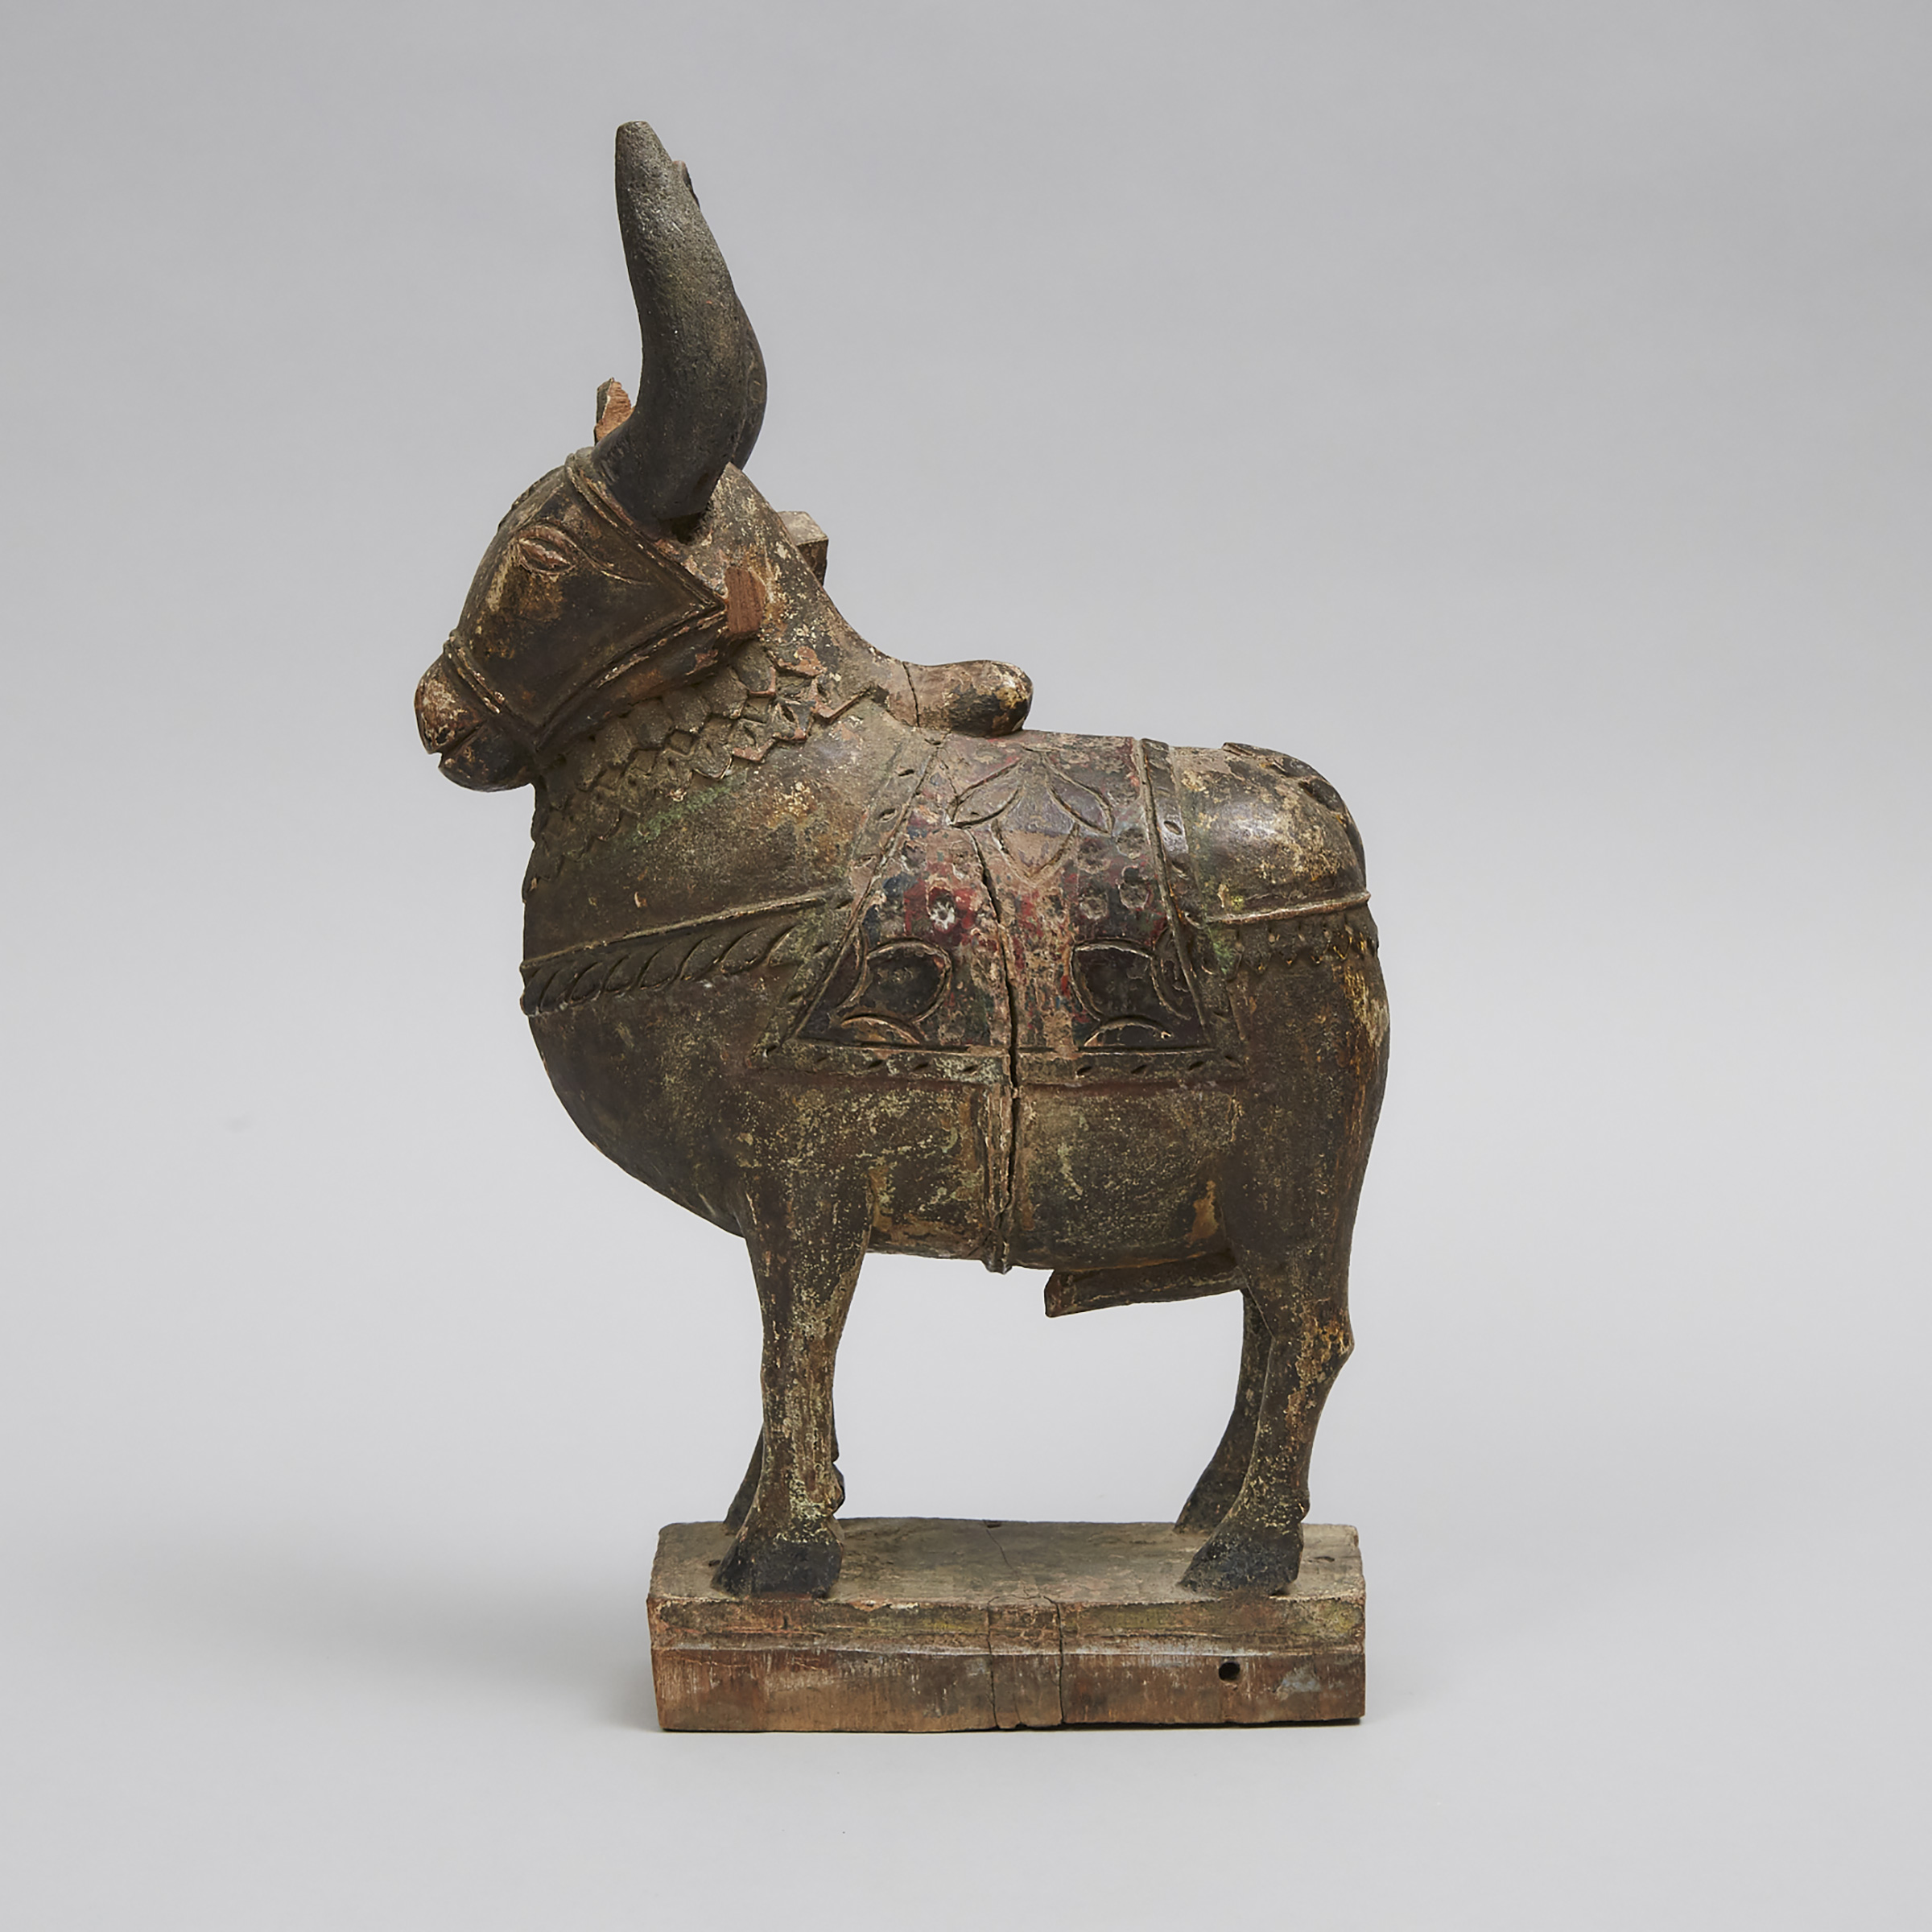 Hindu Carved and Polychromed Model of the Sacred Bull 'Nandi', 18th/19th century